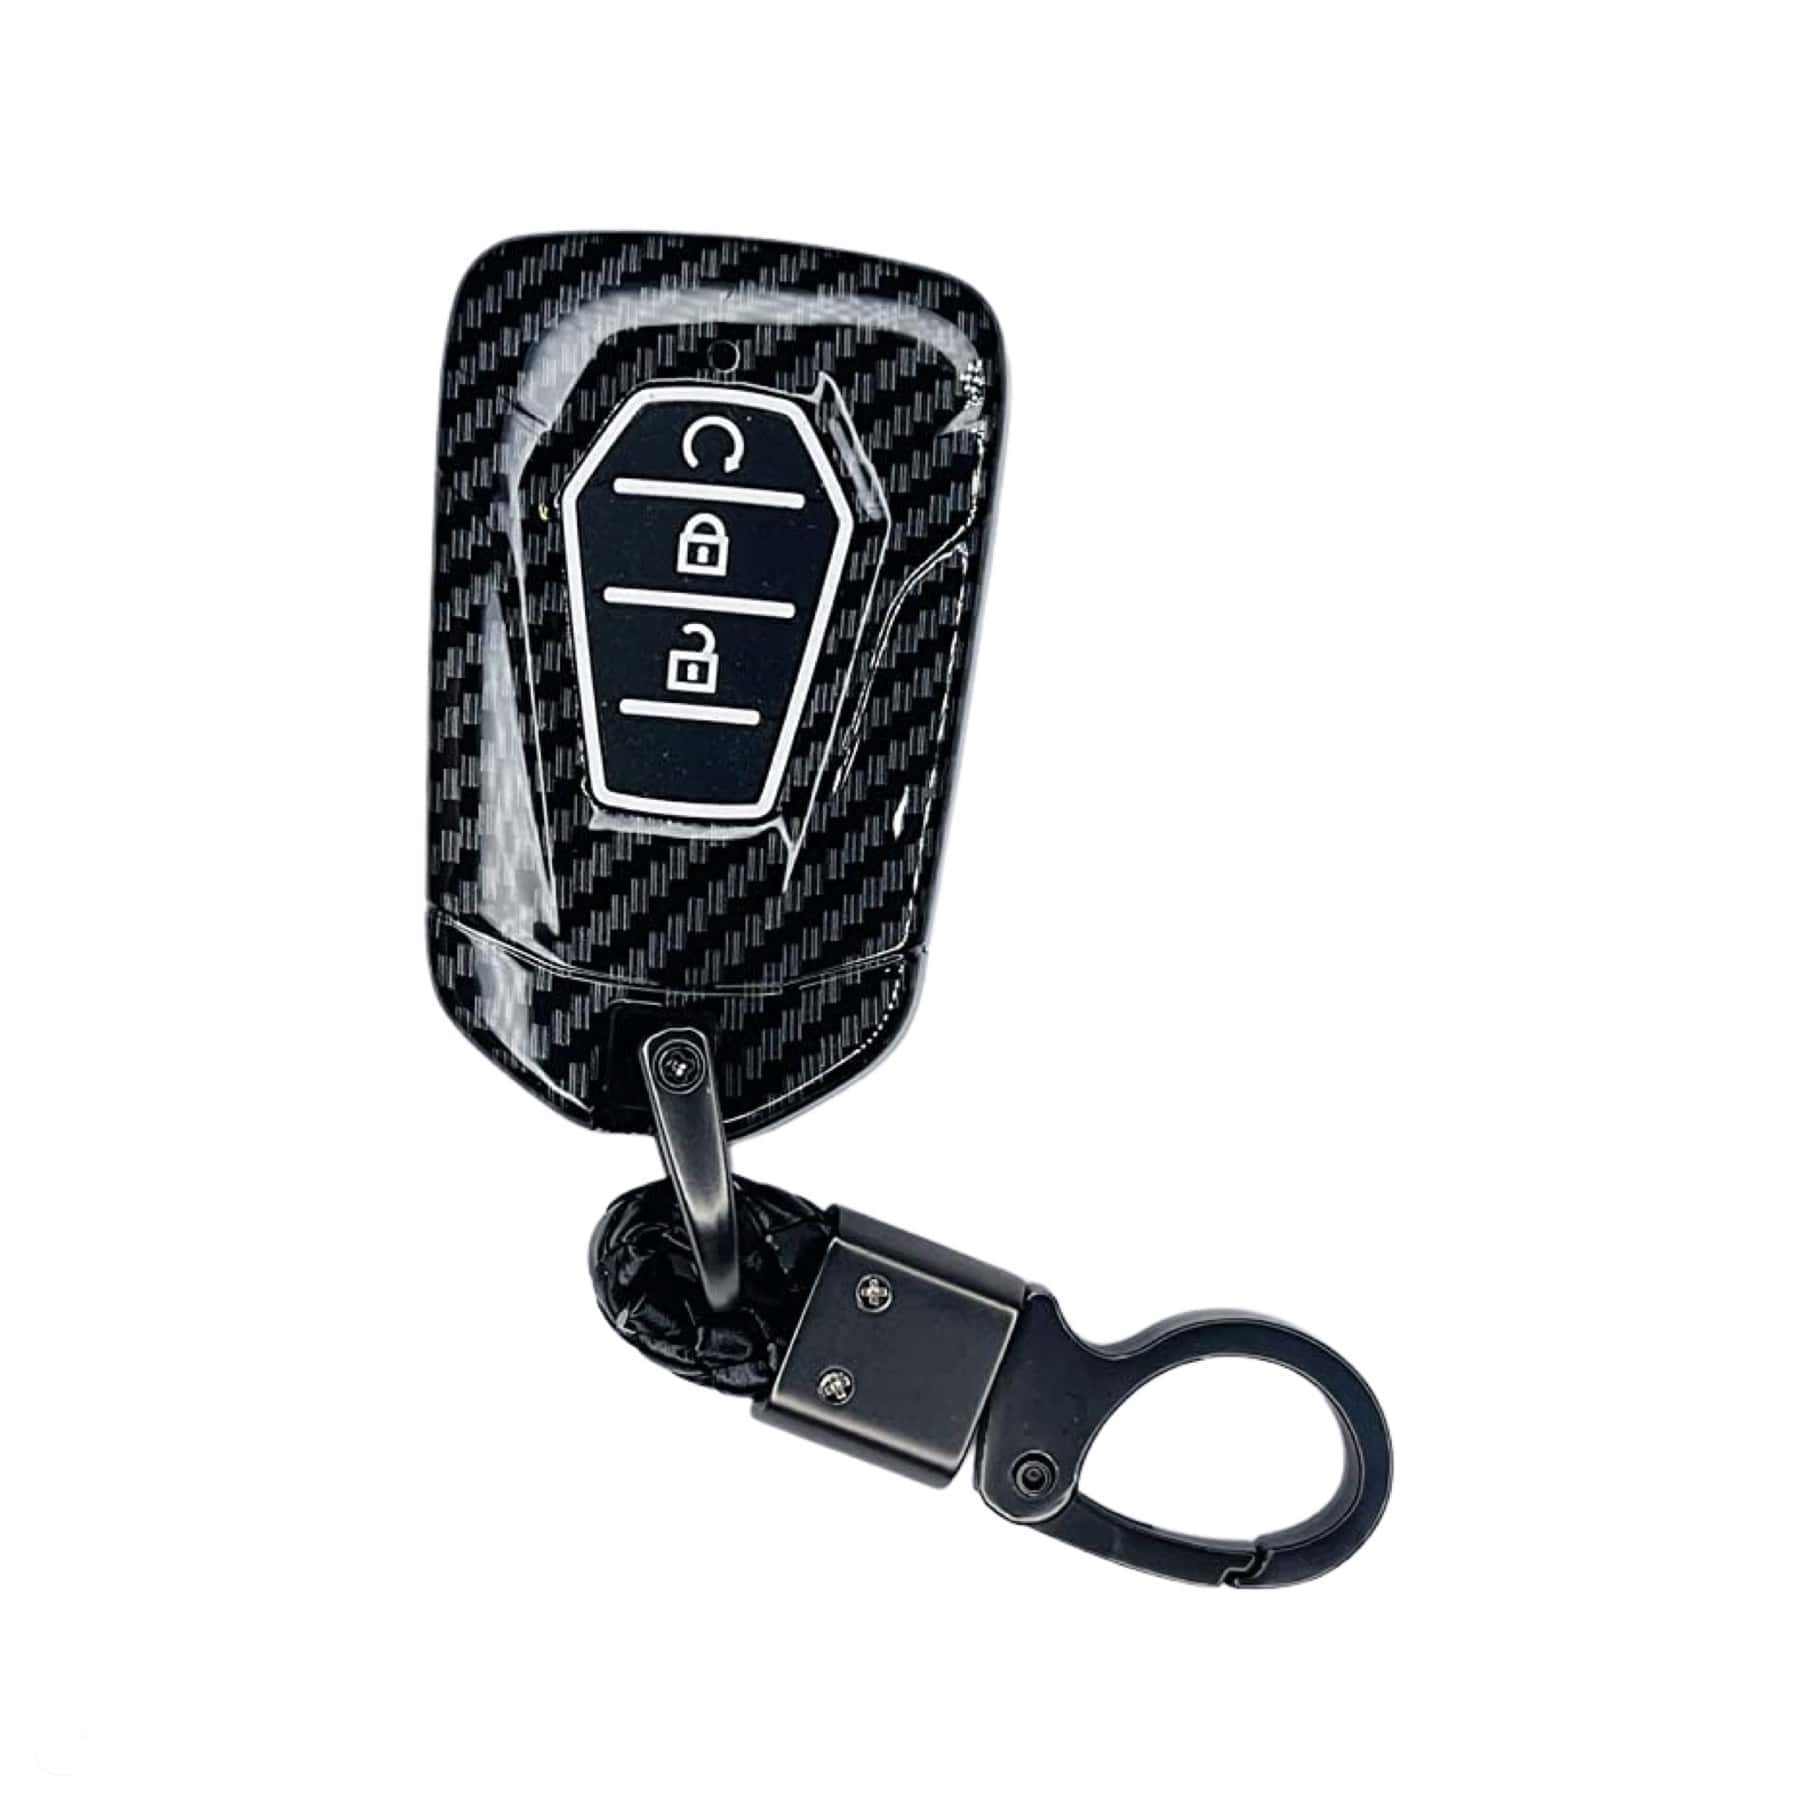 Isuzu Key cover for D-Max and MU-X